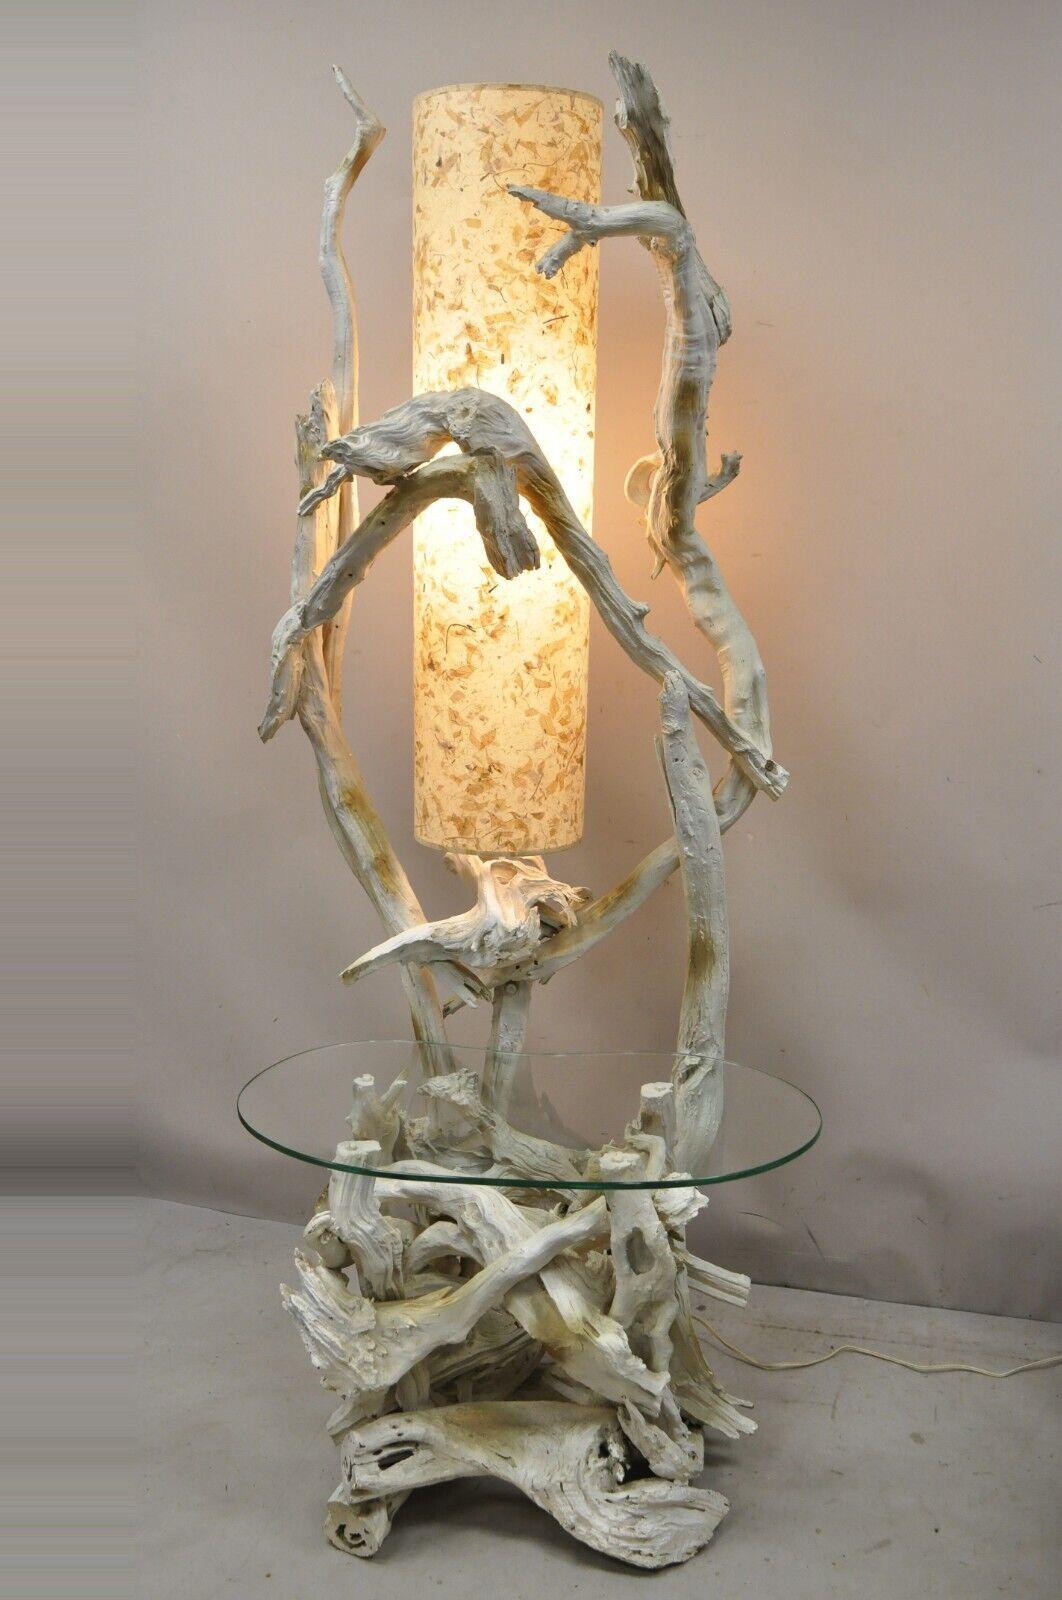 Vintage Driftwood Mid-Century Modern white floor lamp with side table. Item features Impressive driftwood frame, kidney shaped glass top, single lamp socket, original lamp shade which appears to be decorated with dried leaves, white and gold painted